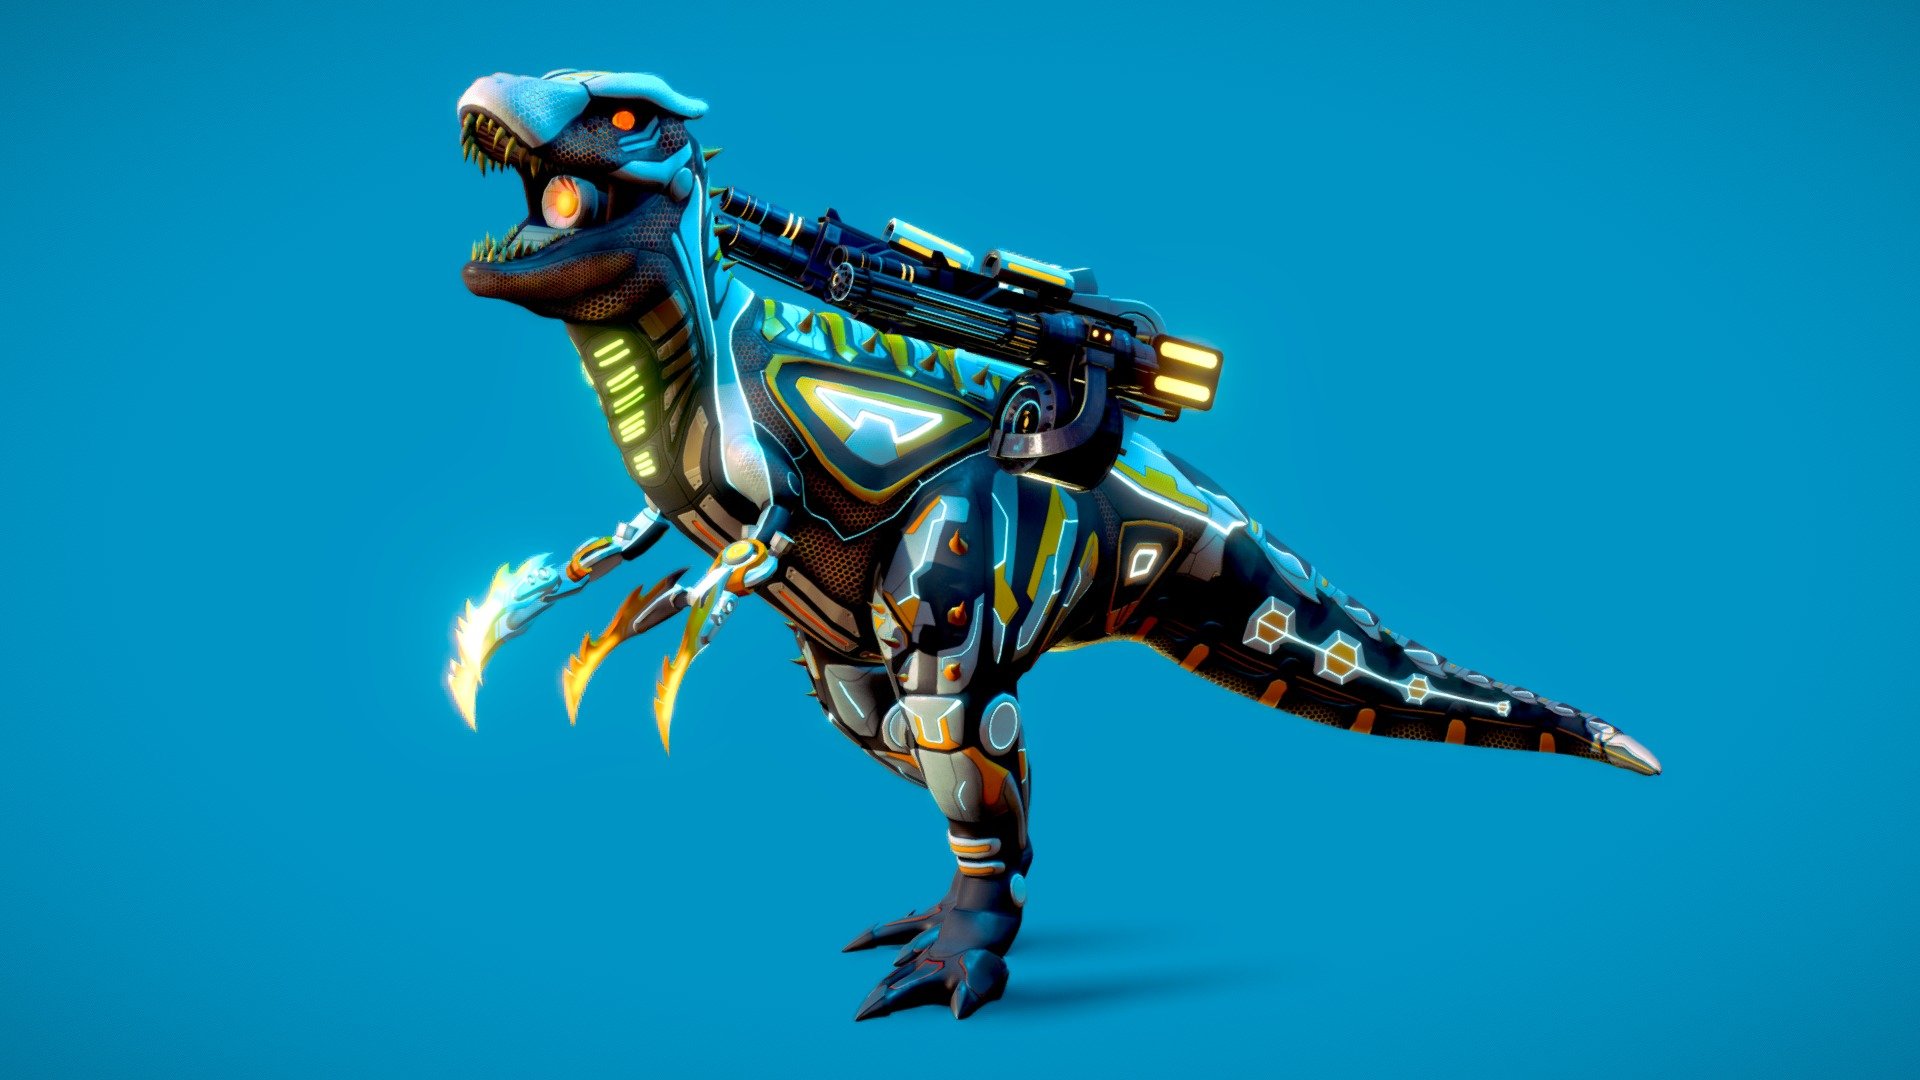 Lowpoly Cybernetic Weaponize Tyranosaurus

**NOTE! Download the ” Additional File ” to get all file. Such as, Blend file ( Rigged &amp; Unrigged ), Fbx file, GLB file and all texture set!
**

3D model made in Blender 3.5.1 version

This model contains:





Static Model




Rig + Pose Model




PBR Texture (Diffuse, Rougness, Metallic, Nomal Map and Heightmap)



3D Details : 
Verts : 41,645
Faces : 42,767
Tris : 80,392 - Lowpoly Cybernetic Tyranosaurus - Buy Royalty Free 3D model by Animabyfad 3d model